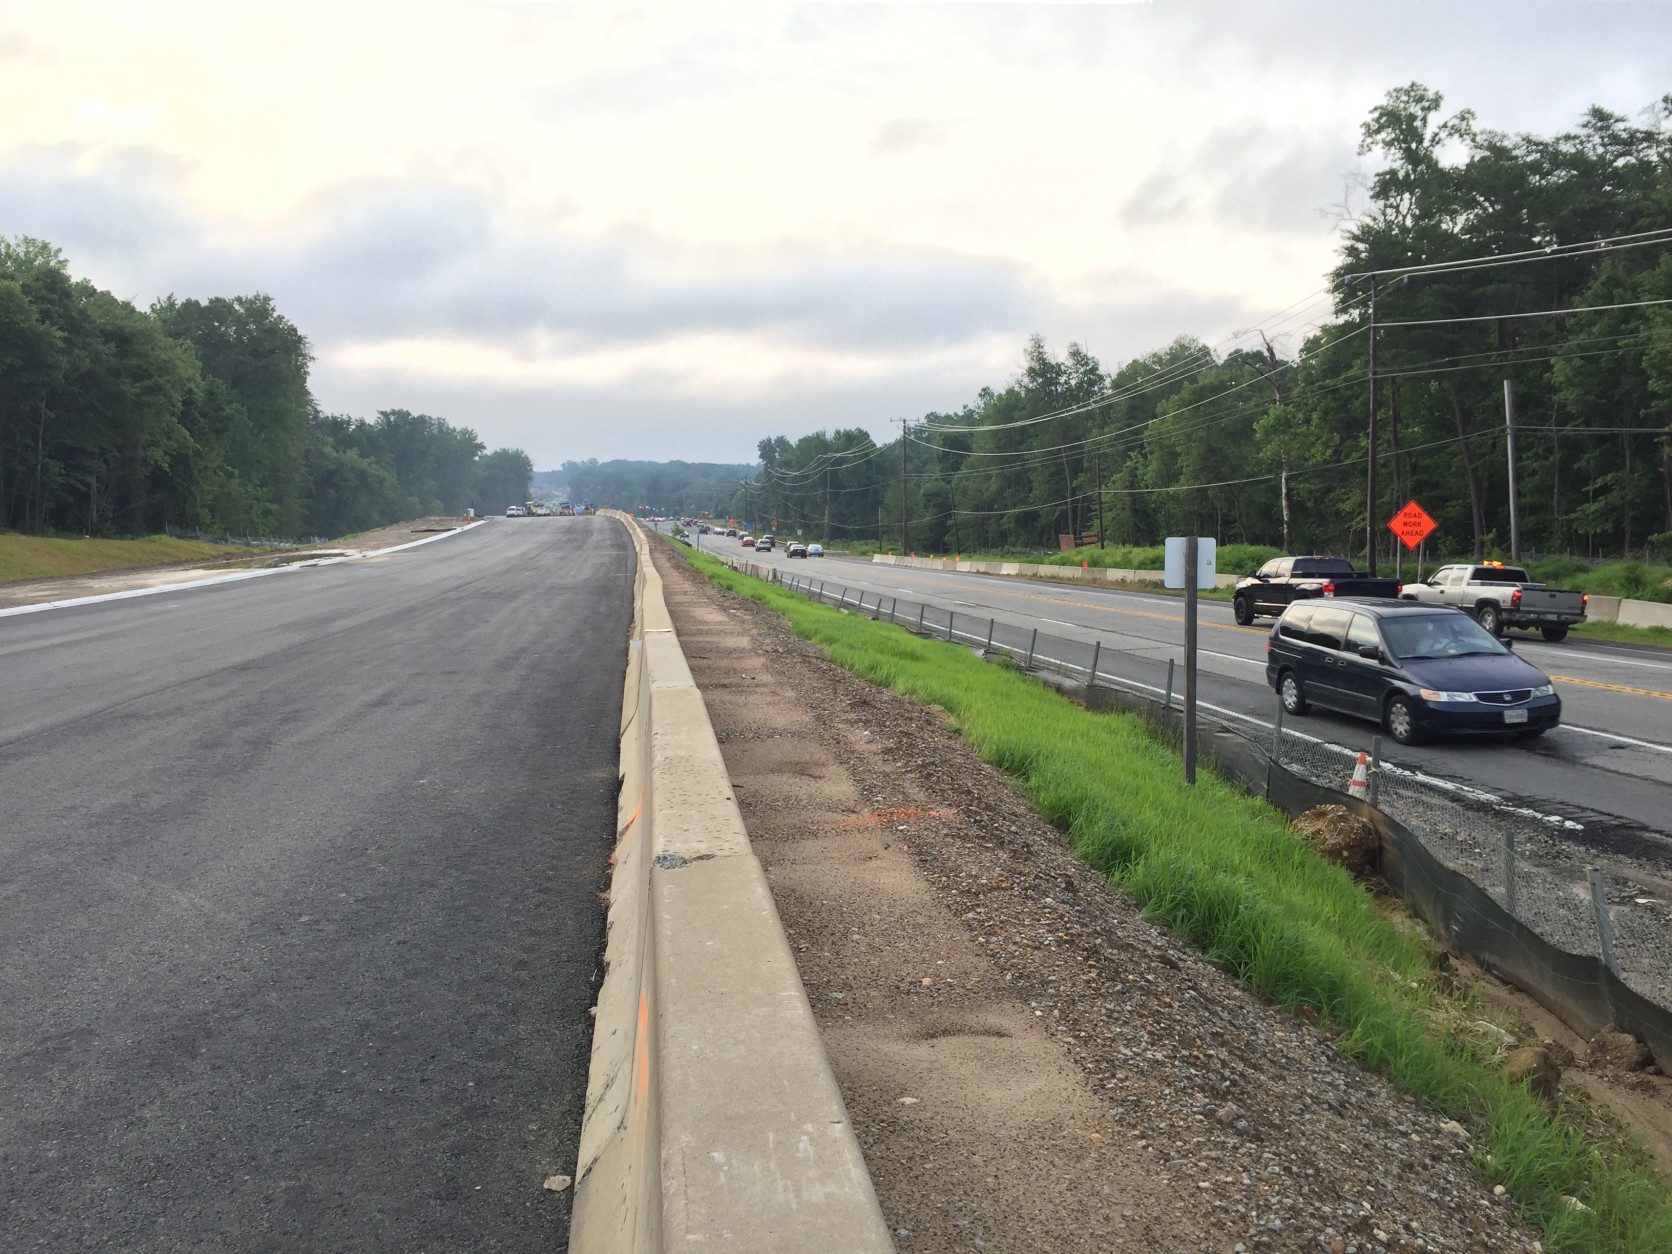 The plan (weather permitting) is to shift Richmond Highway's southbound lanes onto the new roadway and bridge by mid-day Tuesday, June 30 and then shift the northbound lanes over onto the new lanes  by midday Wednesday July 1. (WTOP/Kristi King)